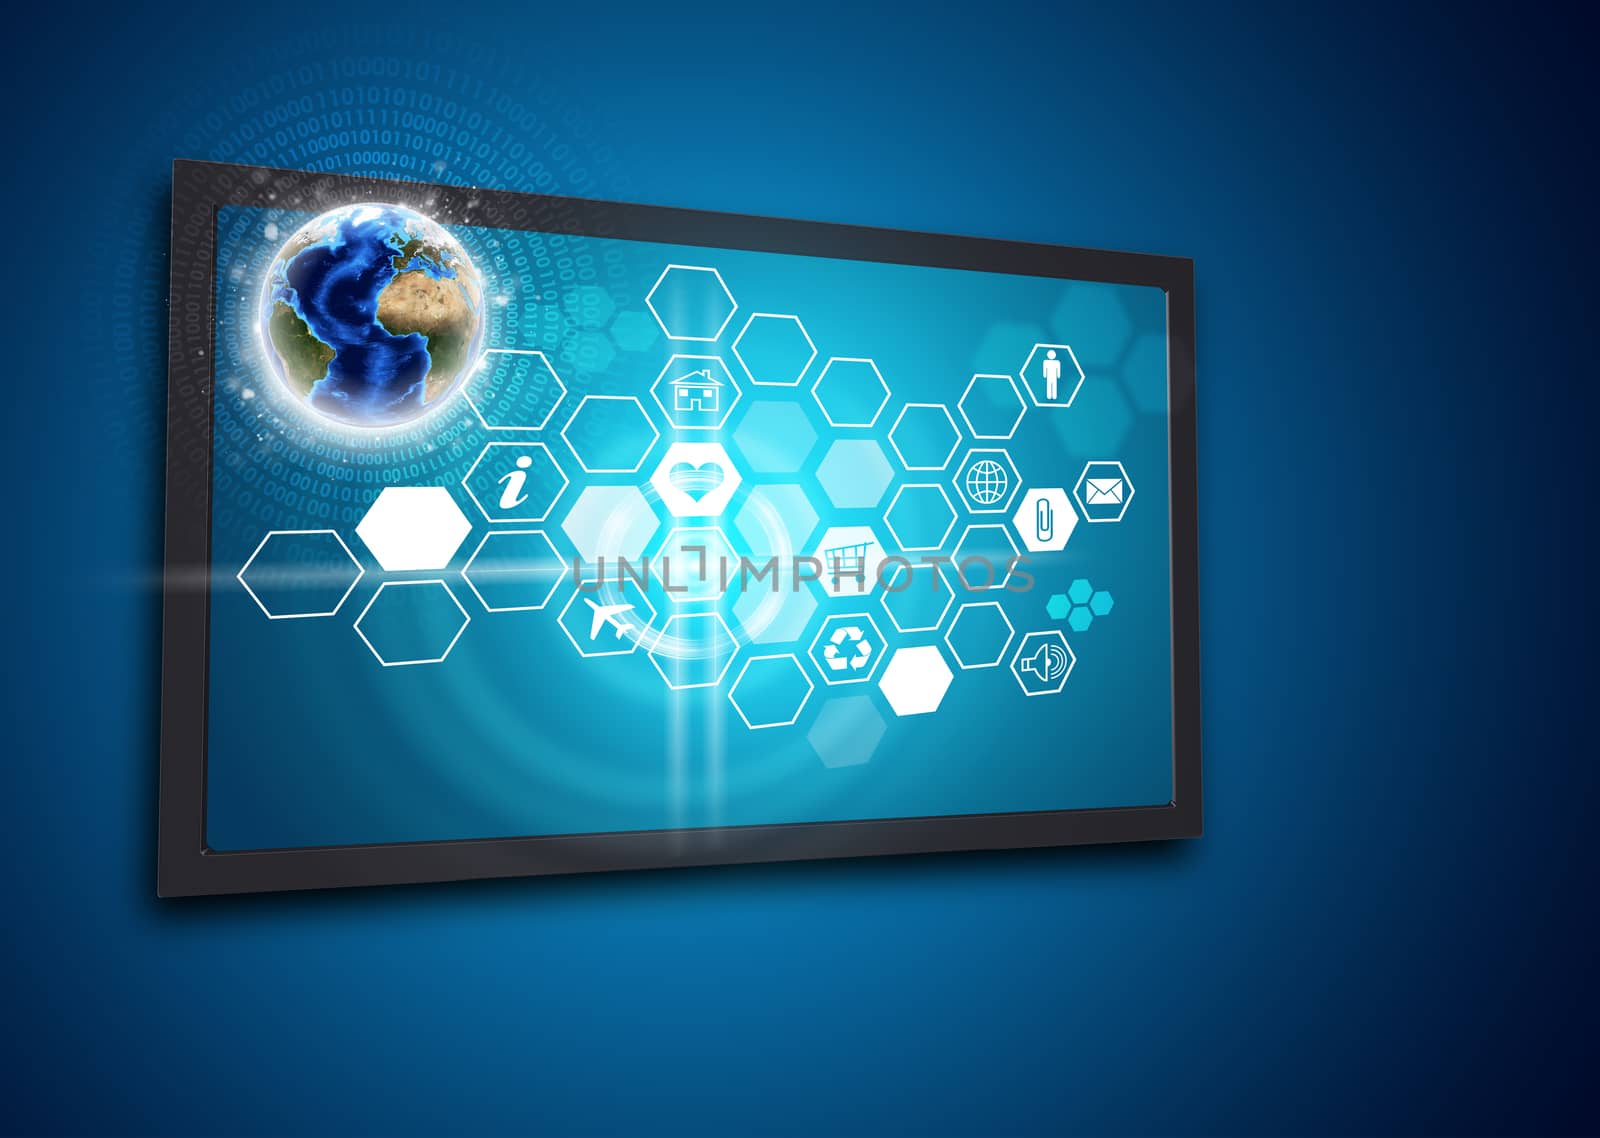 Touchscreen display with Globe and honeycomb shaped icons, on blue background by cherezoff